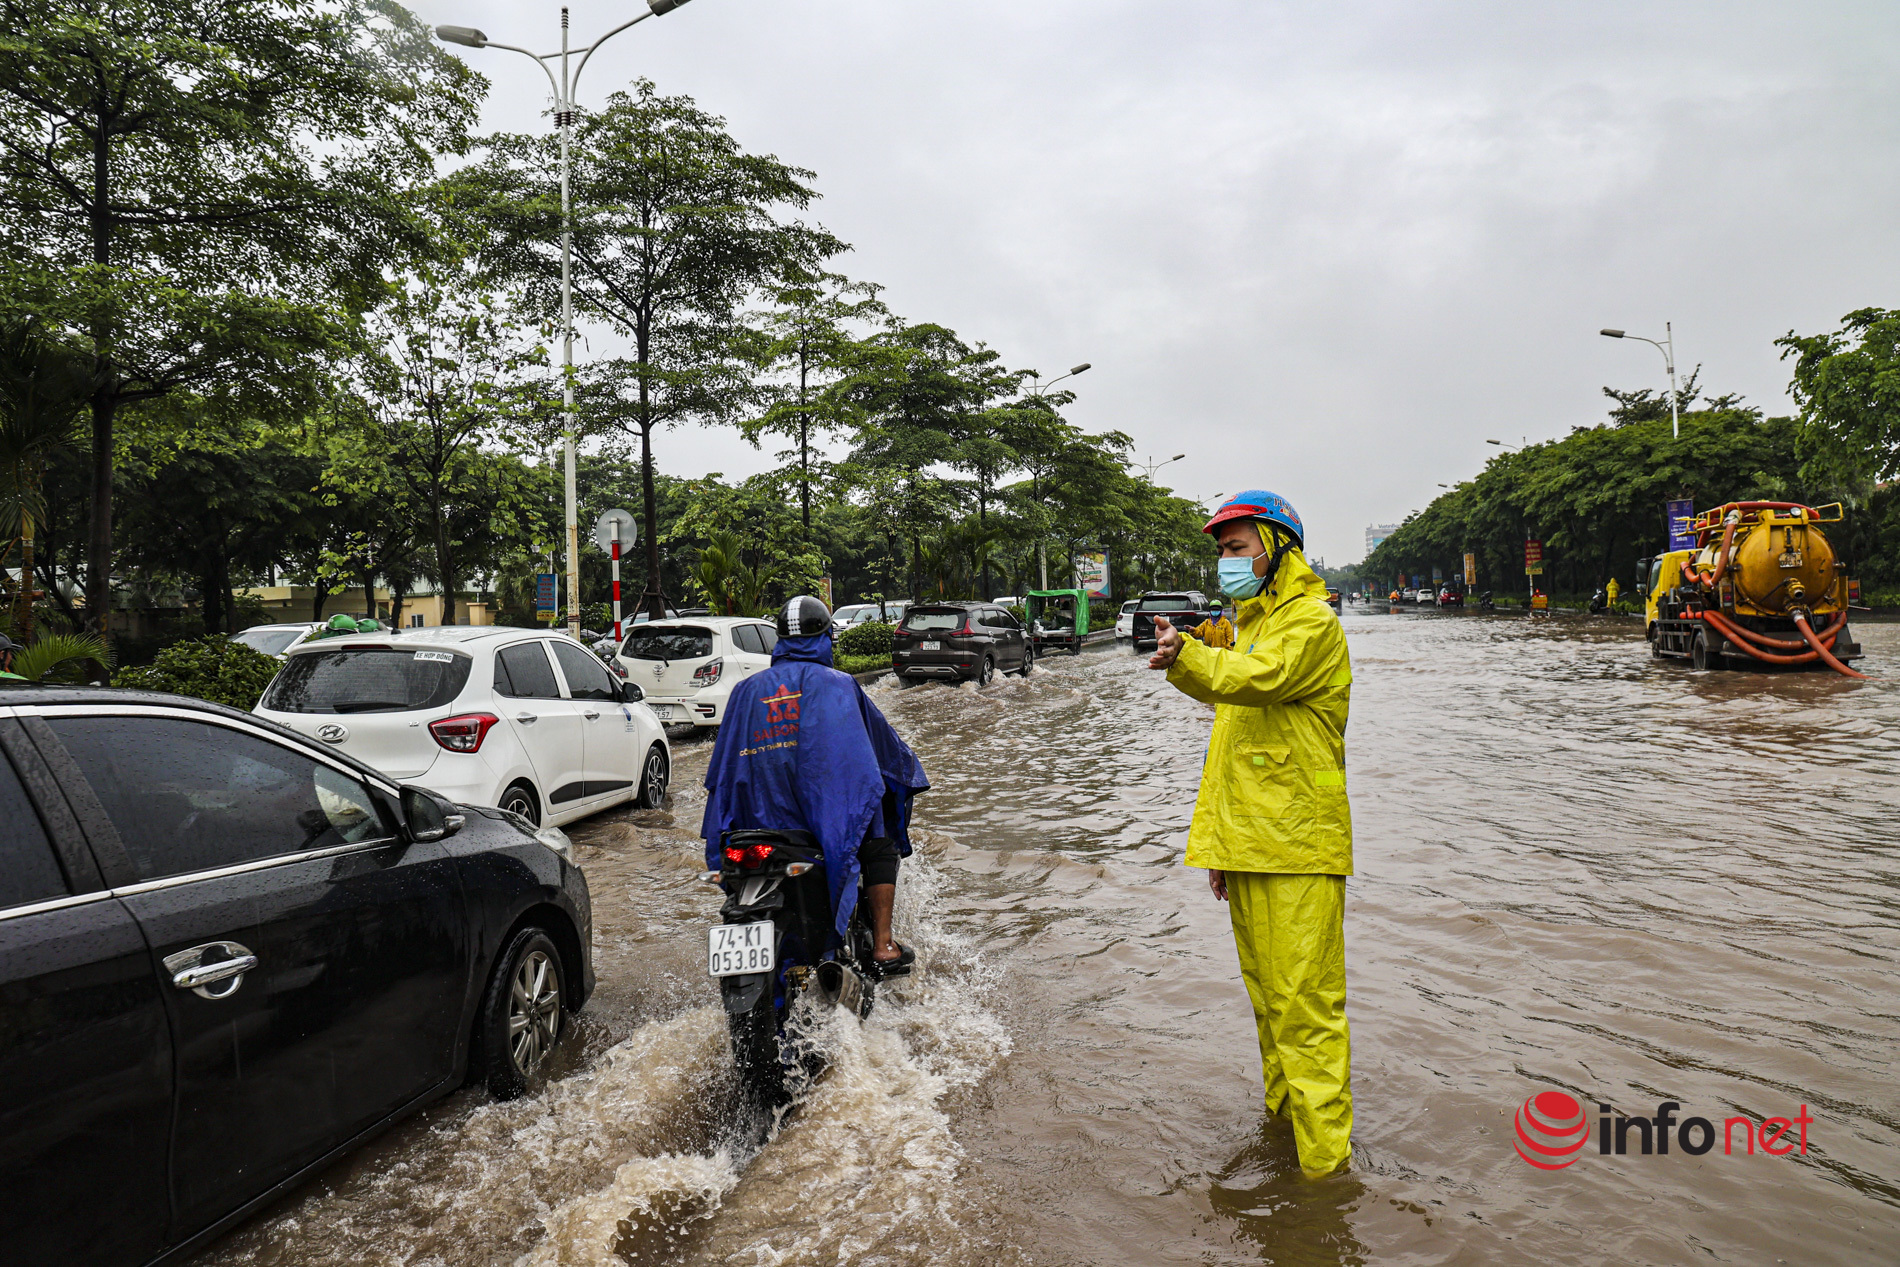 When the rain stops, the streets of Hanoi are still heavily flooded